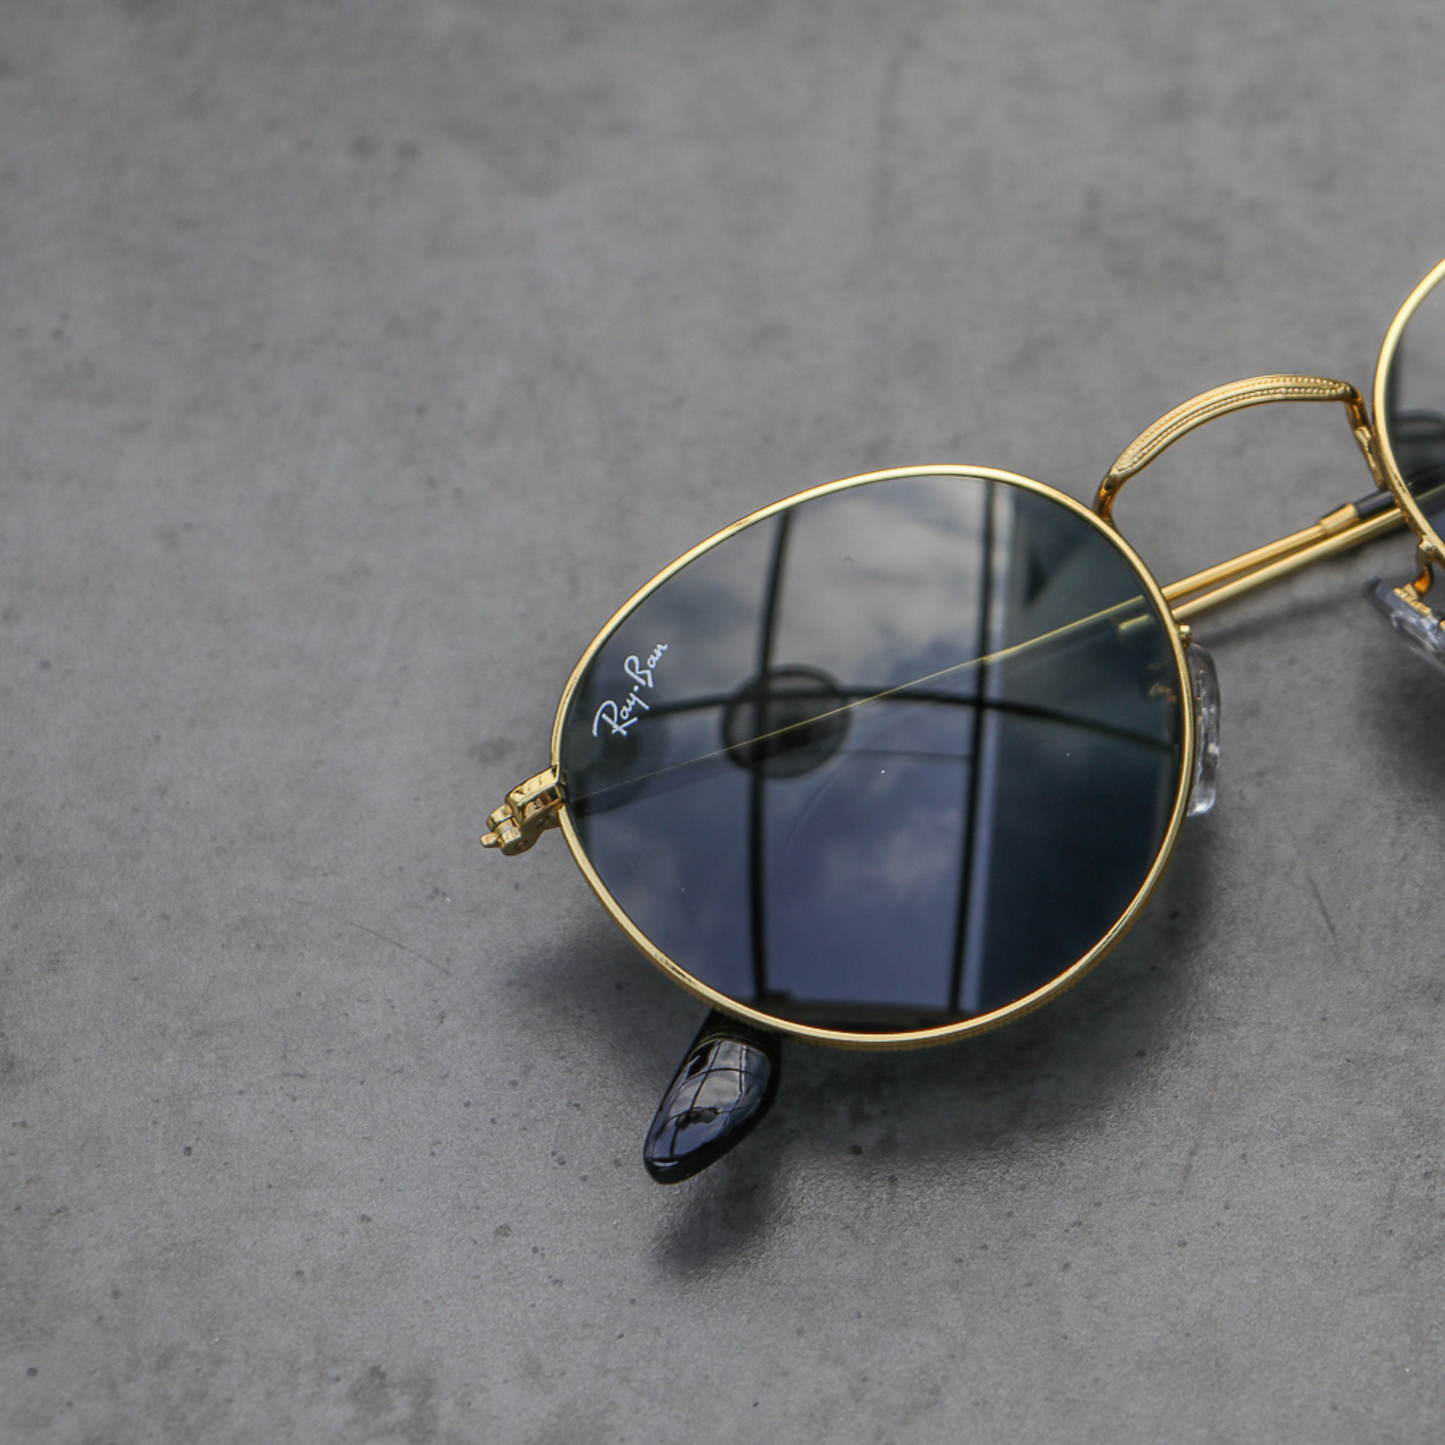 New Stylish Attractive Black & Gold 3447 Round Sunglass For Unisex